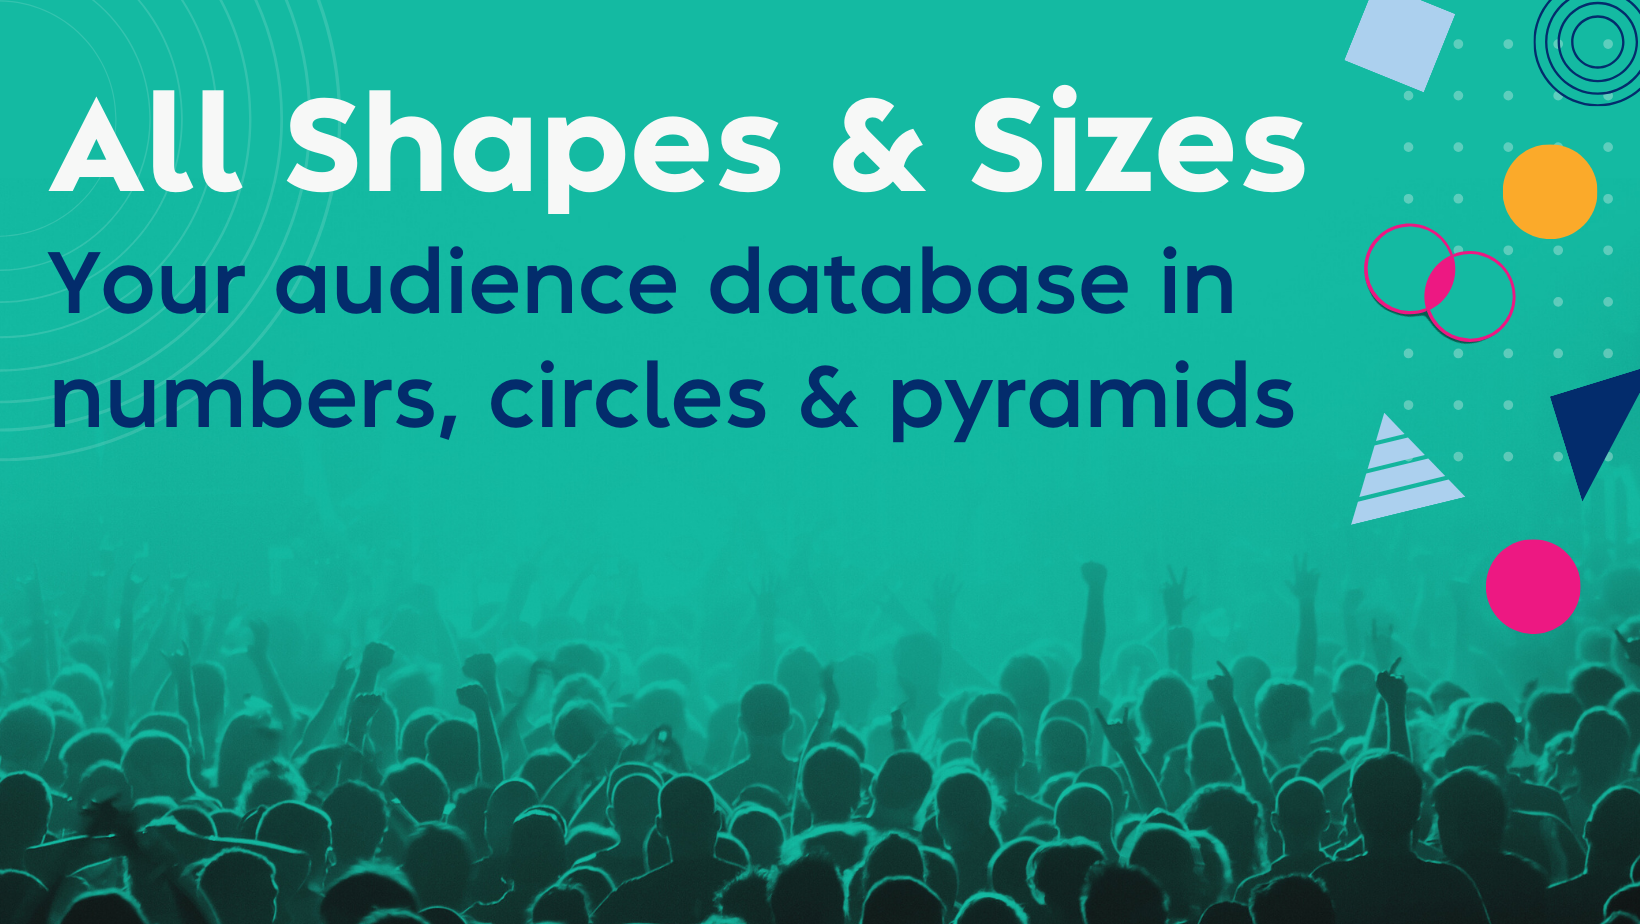 Blog cover image with the title: All shapes & sizes: your audience database in numbers, circles & pyramids. Image background is a crowd